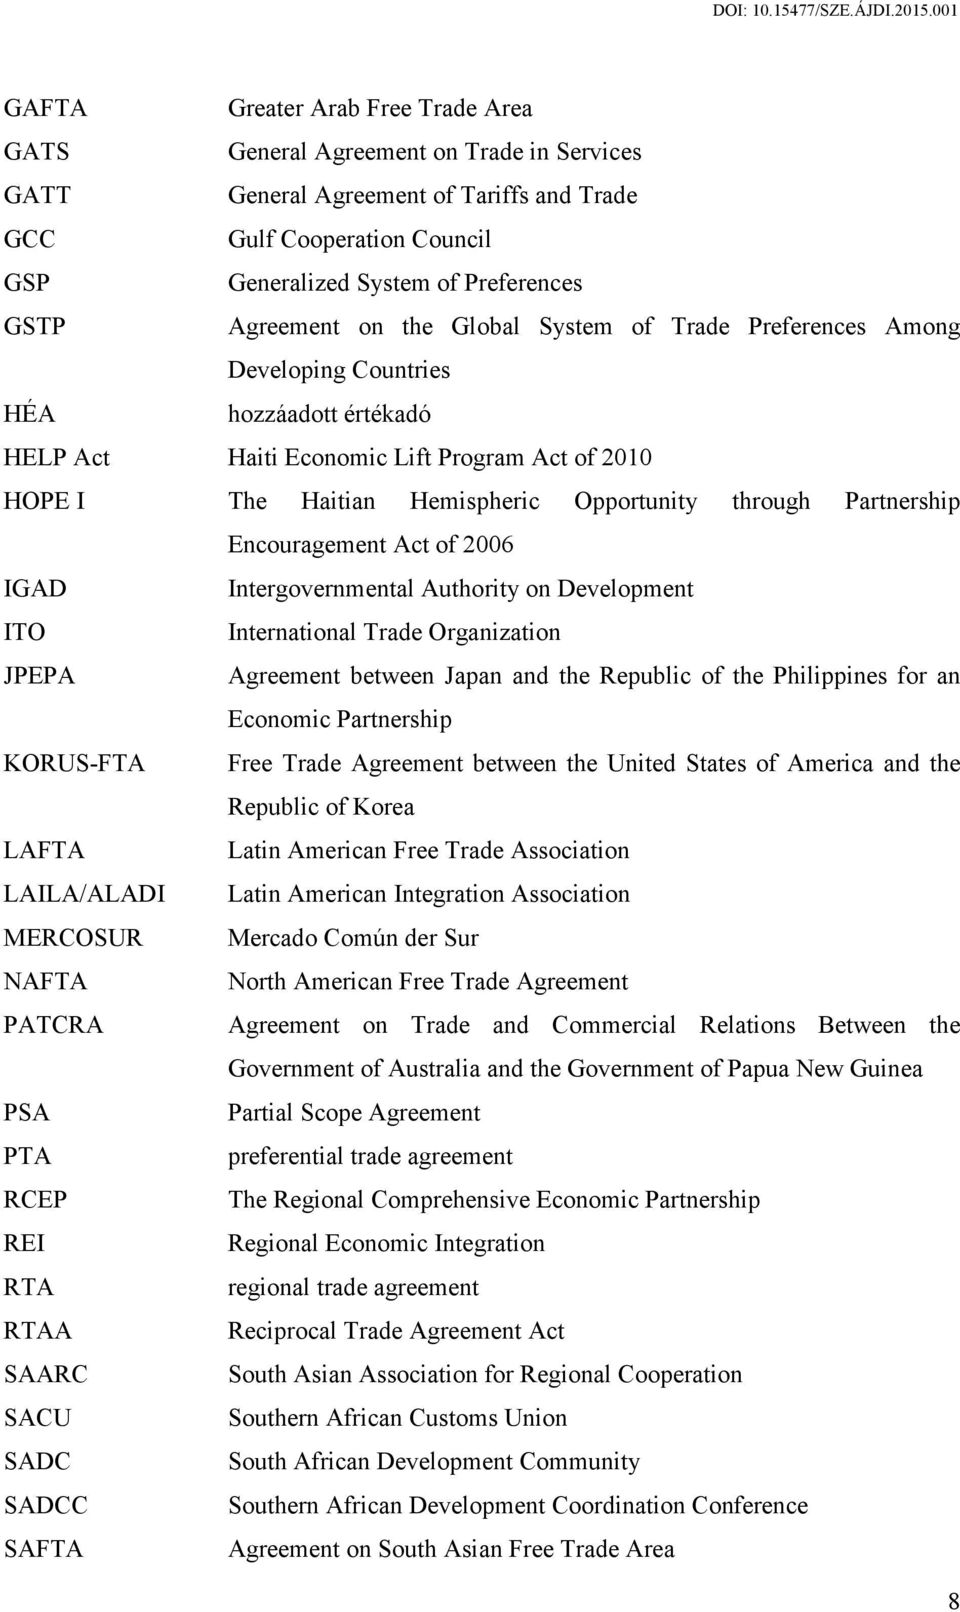 through Partnership Encouragement Act of 2006 IGAD Intergovernmental Authority on Development ITO International Trade Organization JPEPA Agreement between Japan and the Republic of the Philippines